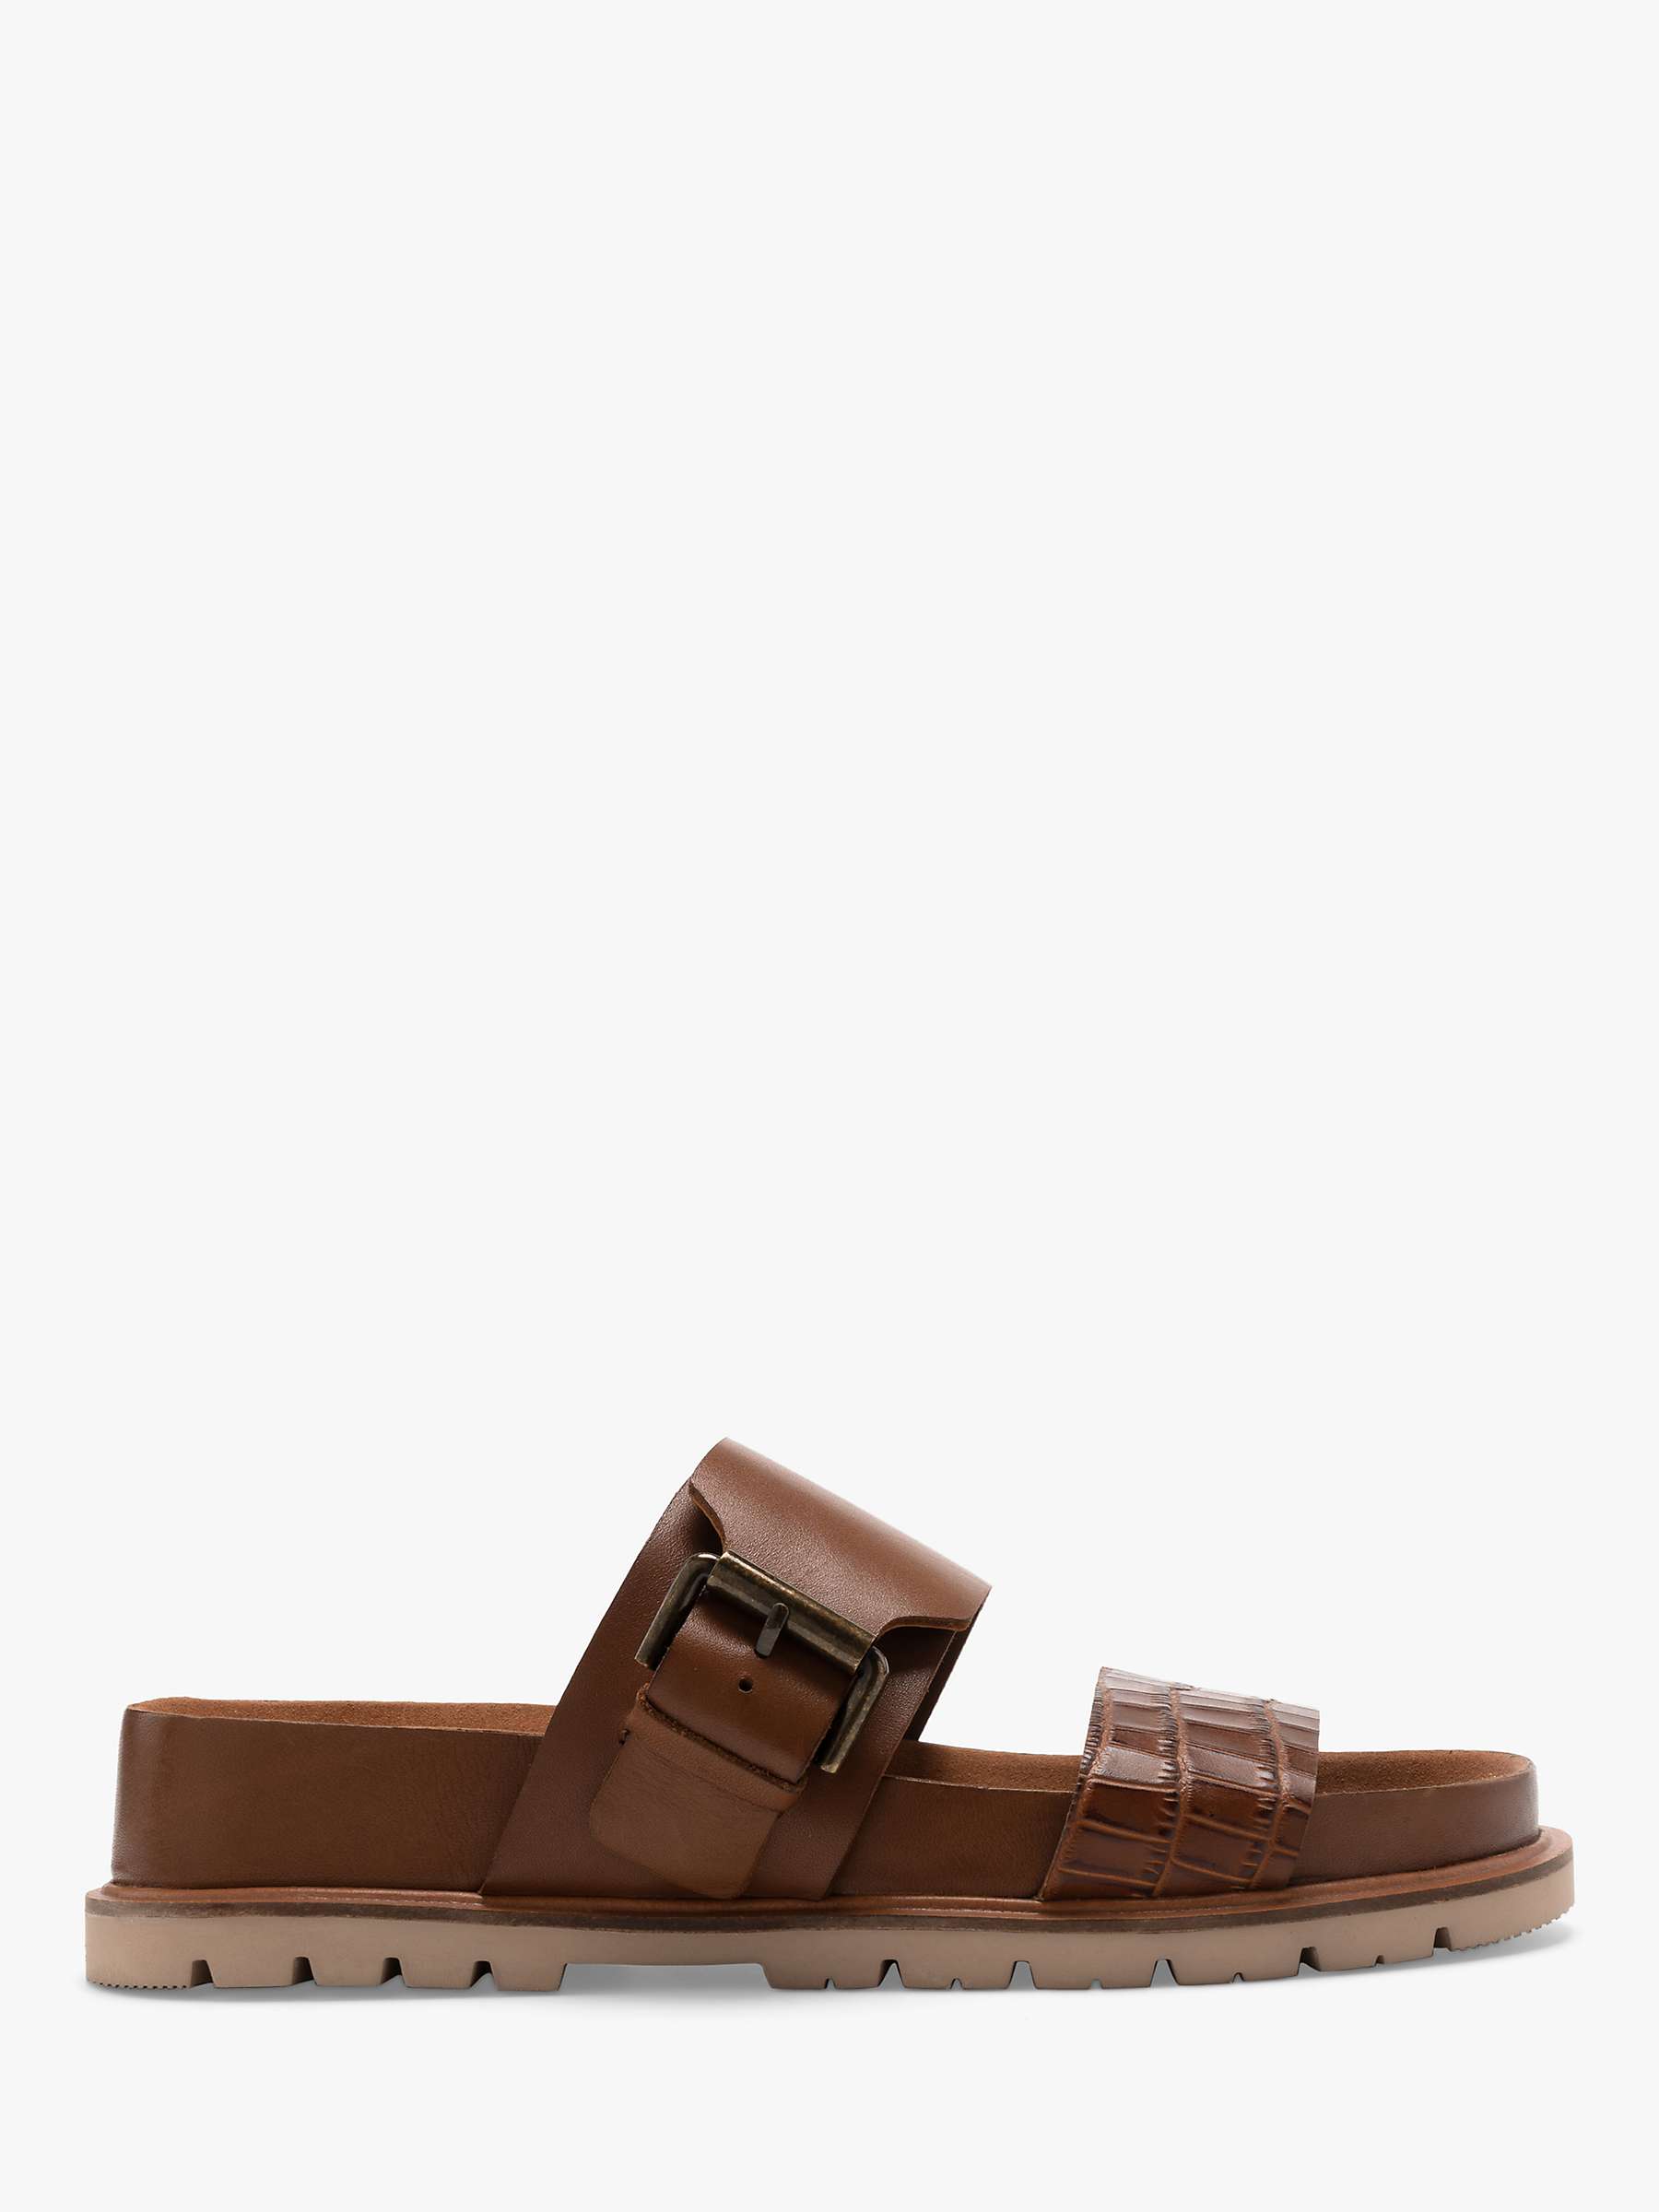 Buy Clarks Orianna Sun Leather Chunky Sandals Online at johnlewis.com